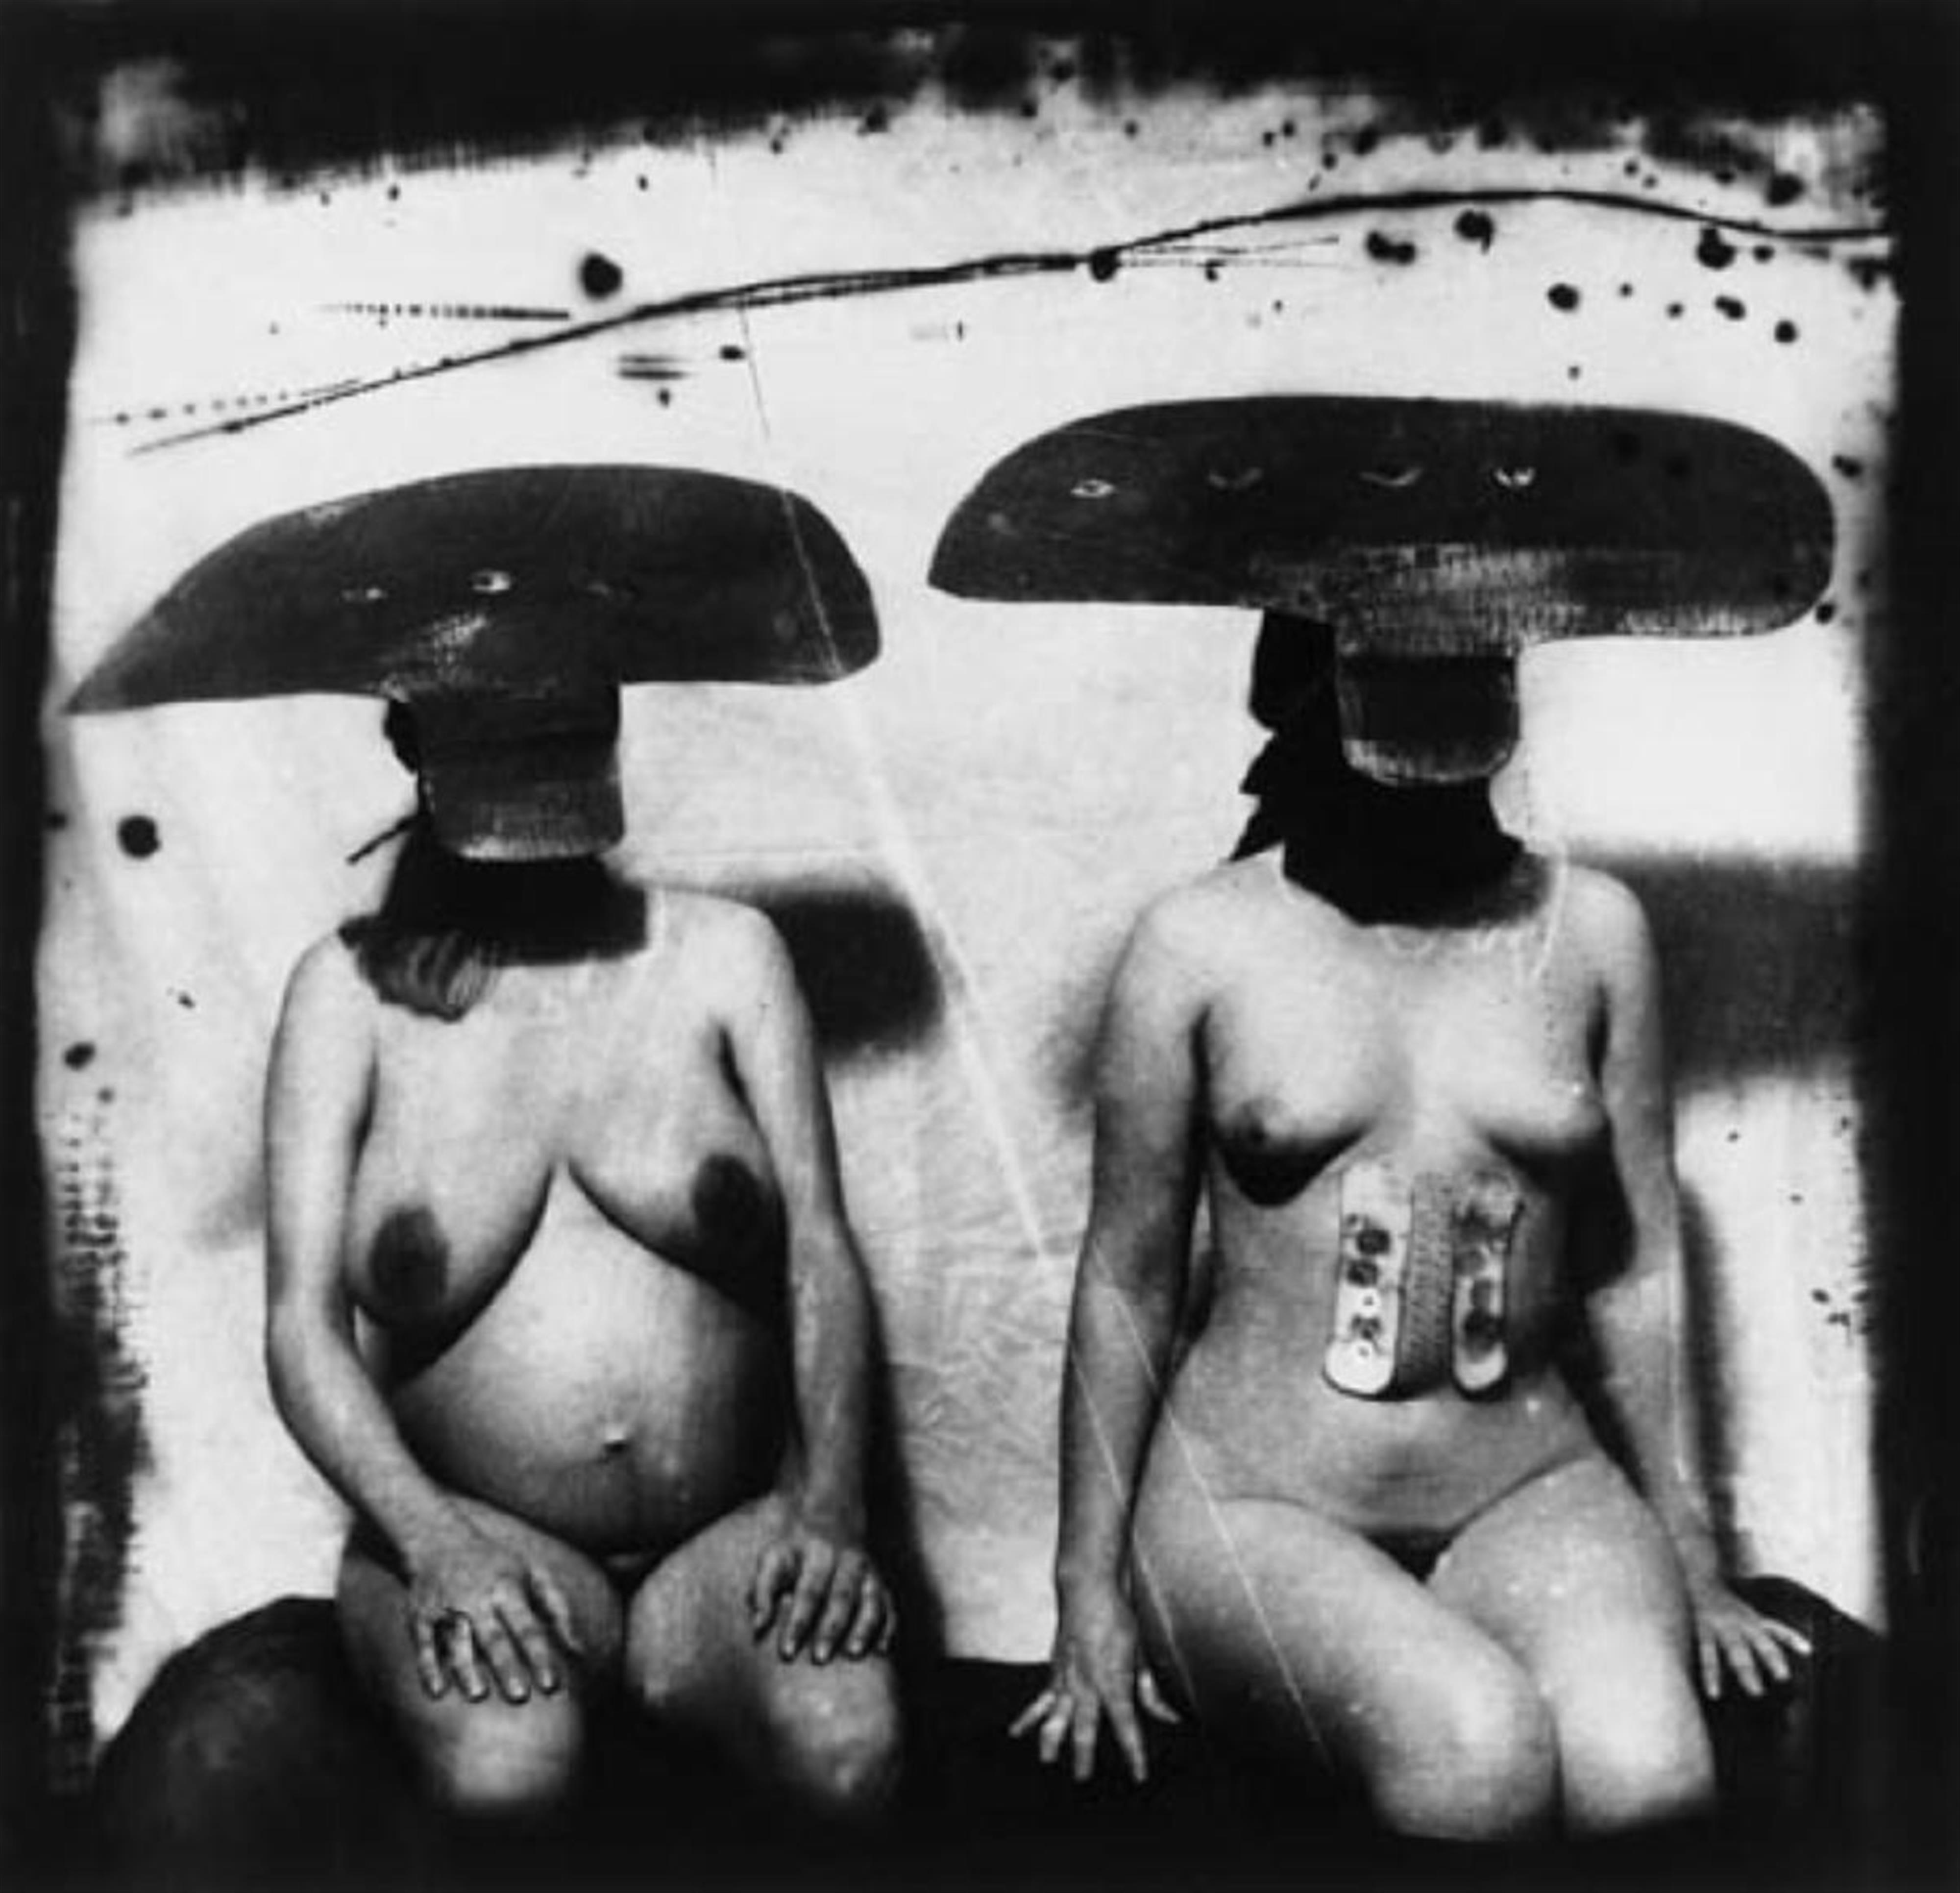 Joel-Peter Witkin - I.D. Photograph from Purgatory: Two Women with Stomach Irritations - image-1